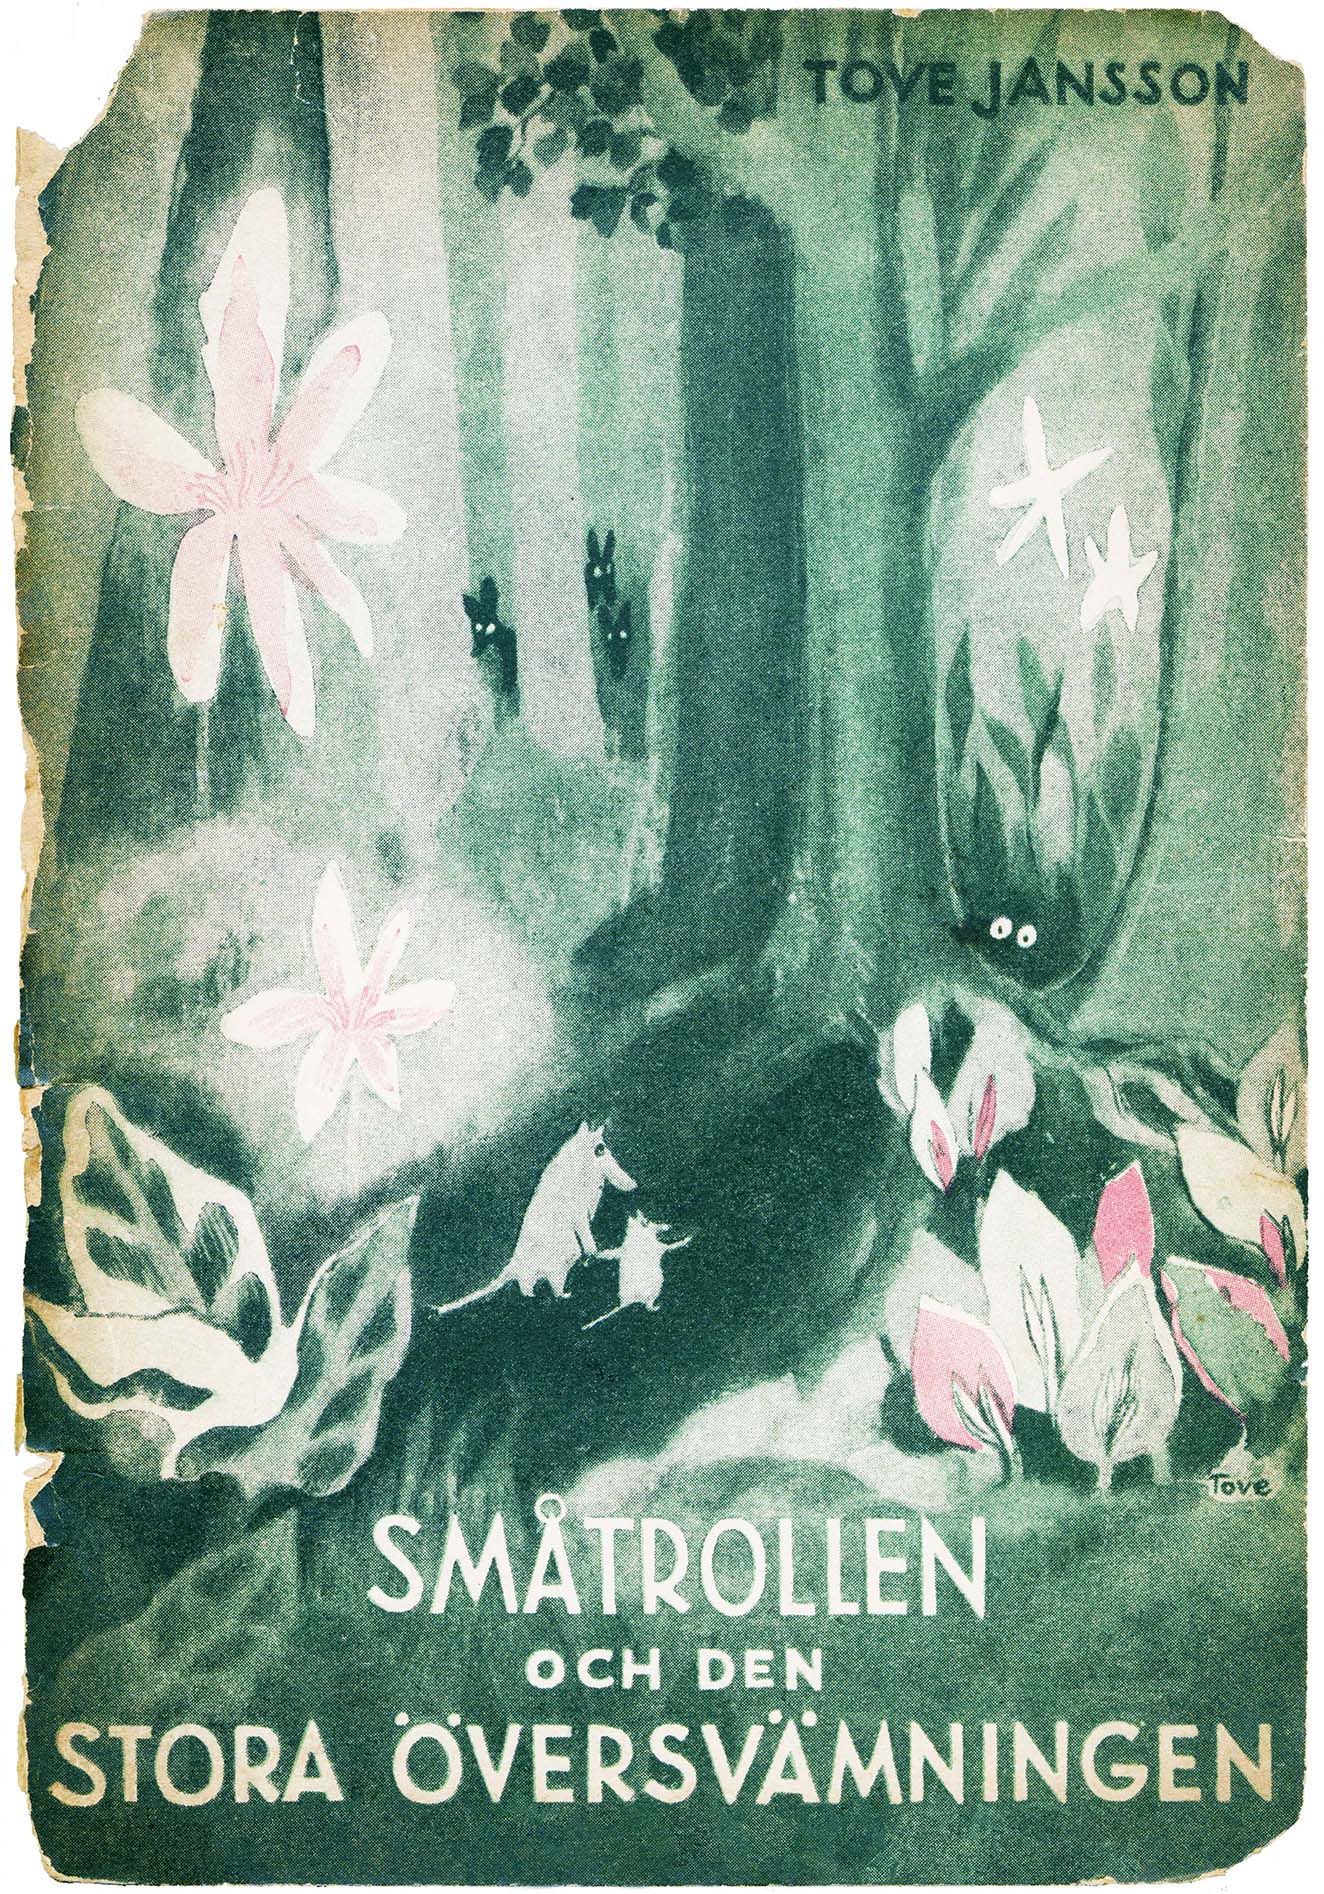 Tove Jansson's book cover for the original Swedish version of the book The Moomins and the Great Flood, 1945.